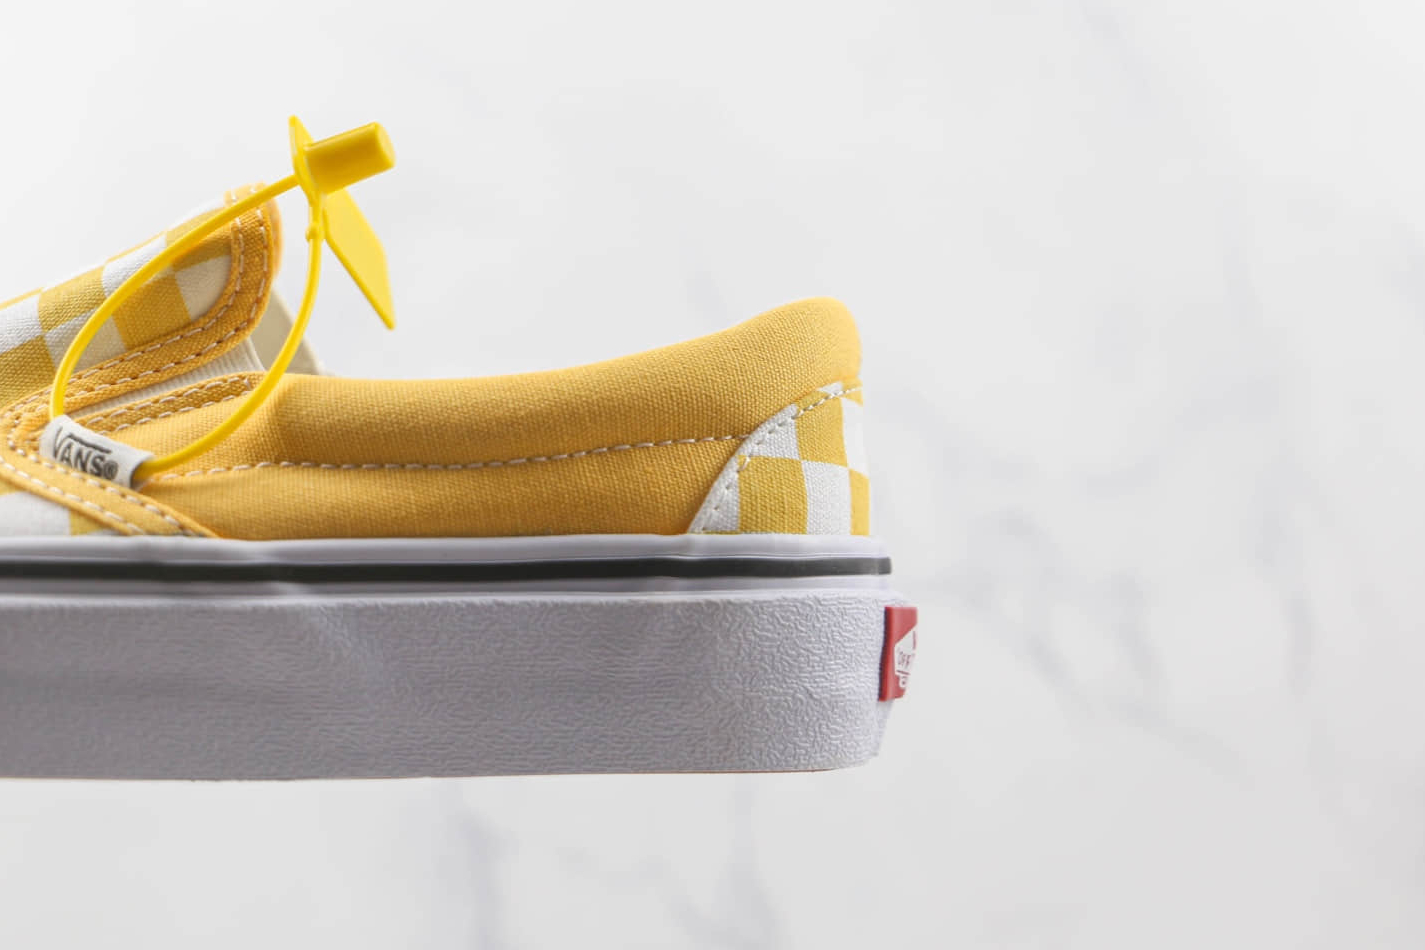 Vans Classic Slip-On 'Checkerboard - Cyber Yellow' VN0A33TB42Z: Stylish Slip-On Shoes for Men - Limited Stock